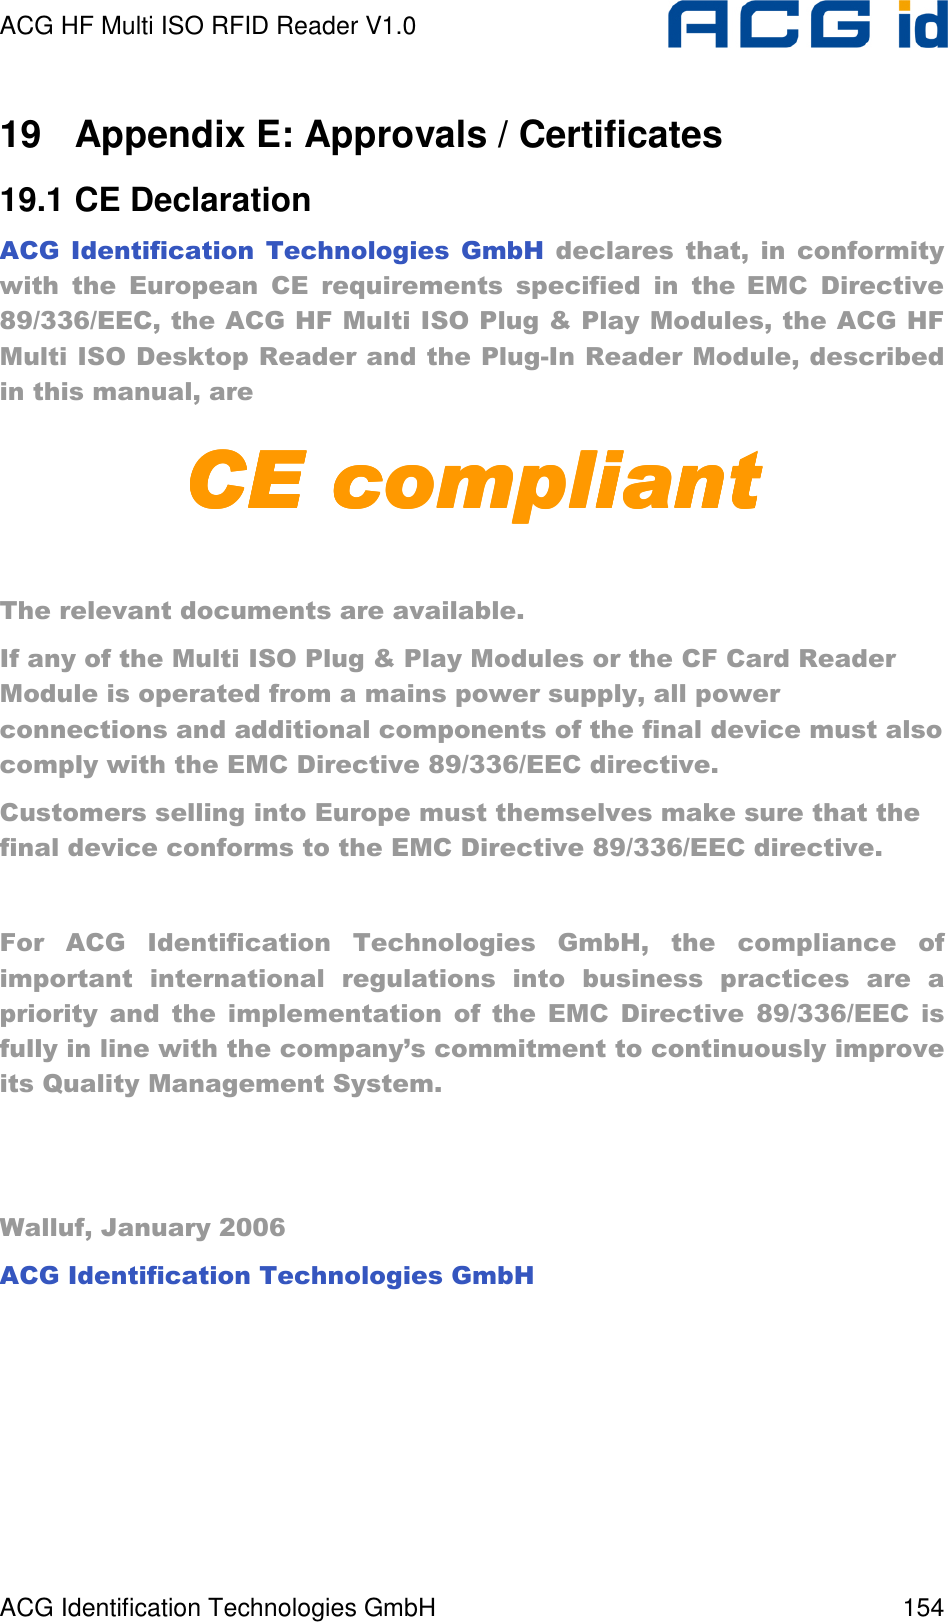 ACG HF Multi ISO RFID Reader V1.0 ACG Identification Technologies GmbH  154 19  Appendix E: Approvals / Certificates 19.1 CE Declaration ACG  Identification  Technologies  GmbH  declares  that,  in  conformity with  the  European  CE  requirements  specified  in  the EMC  Directive 89/336/EEC, the ACG HF Multi ISO Plug &amp; Play Modules, the ACG HF Multi ISO Desktop Reader and the Plug-In Reader Module, described in this manual, are CE compliantCE compliantCE compliantCE compliant     The relevant documents are available. If any of the Multi ISO Plug &amp; Play Modules or the CF Card Reader Module is operated from a mains power supply, all power connections and additional components of the final device must also comply with the EMC Directive 89/336/EEC directive. Customers selling into Europe must themselves make sure that the final device conforms to the EMC Directive 89/336/EEC directive.  For  ACG  Identification  Technologies  GmbH,  the  compliance  of important  international  regulations  into  business  practices  are  a priority  and  the  implementation  of  the  EMC  Directive  89/336/EEC  is fully in line with the company’s commitment to continuously improve its Quality Management System.    Walluf, January 2006 ACG Identification Technologies GmbH  